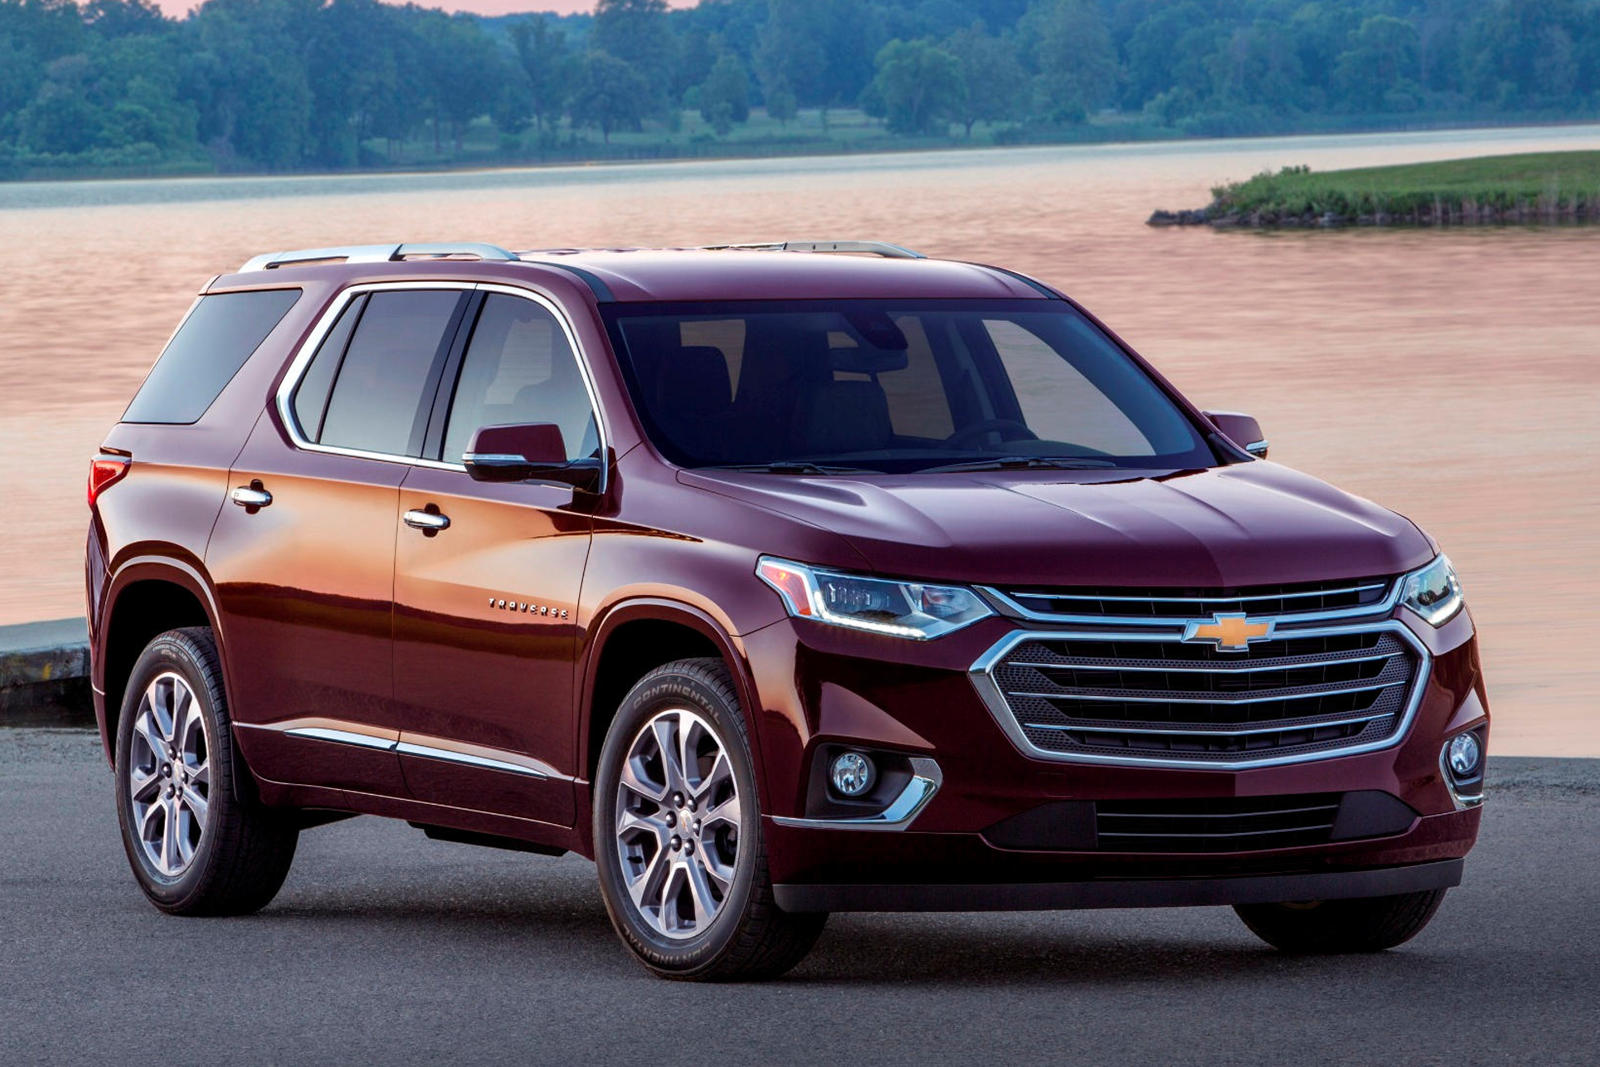 2021 Chevrolet Traverse Review, Pricing | Chevy Traverse SUV Models |  CarBuzz